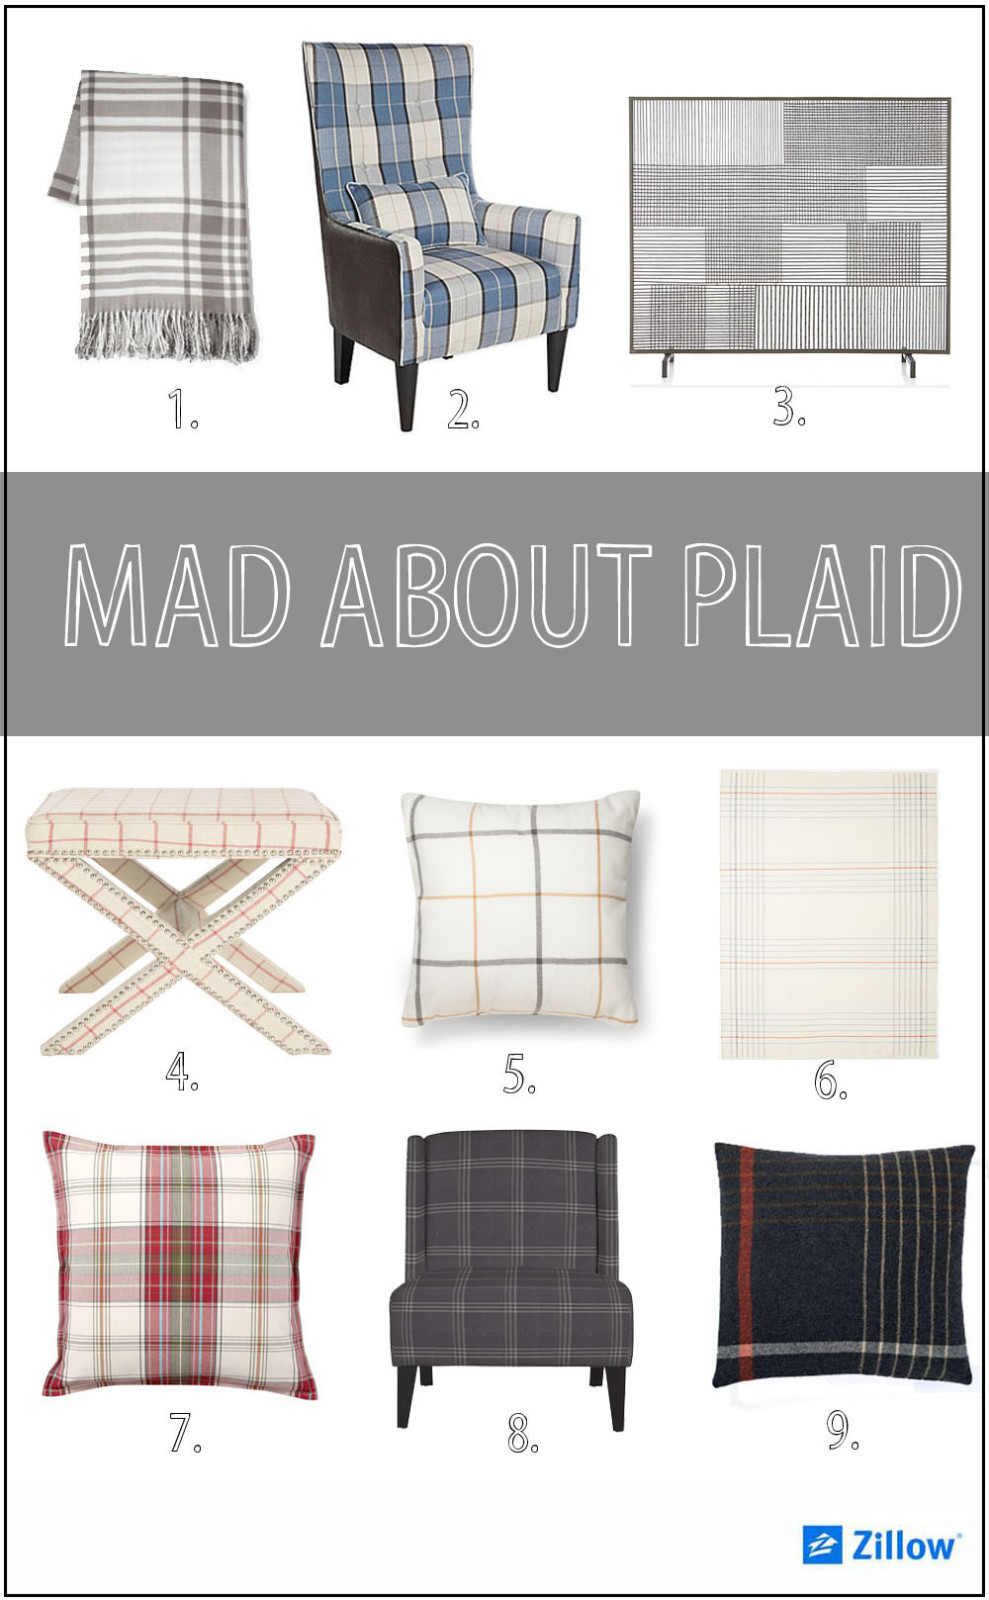 mad about plaid branded